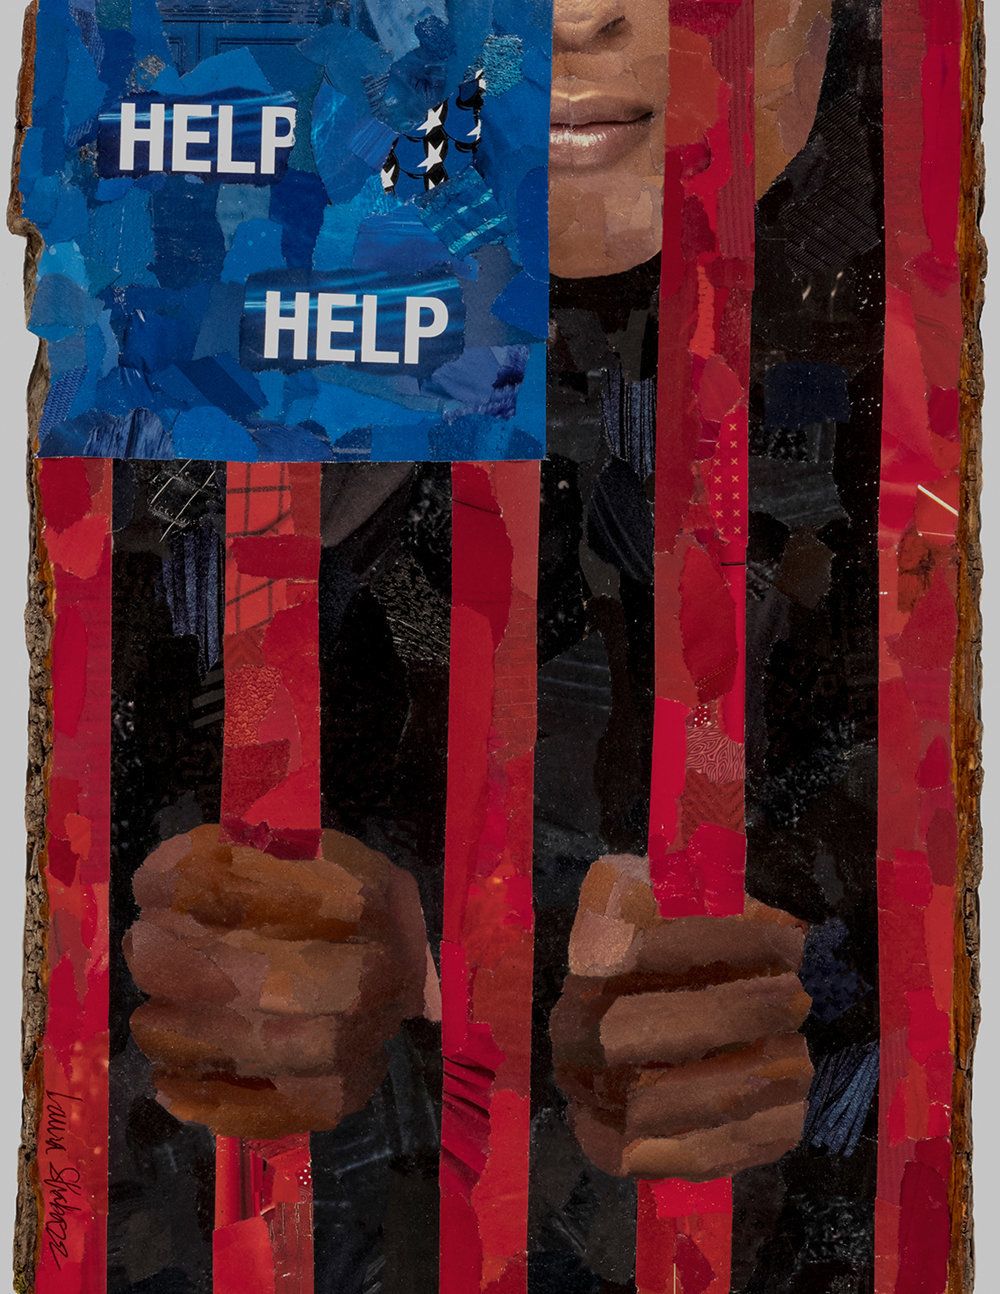 Laura Shabazz, "Help." Archival inkjet print of magazine paper collage.